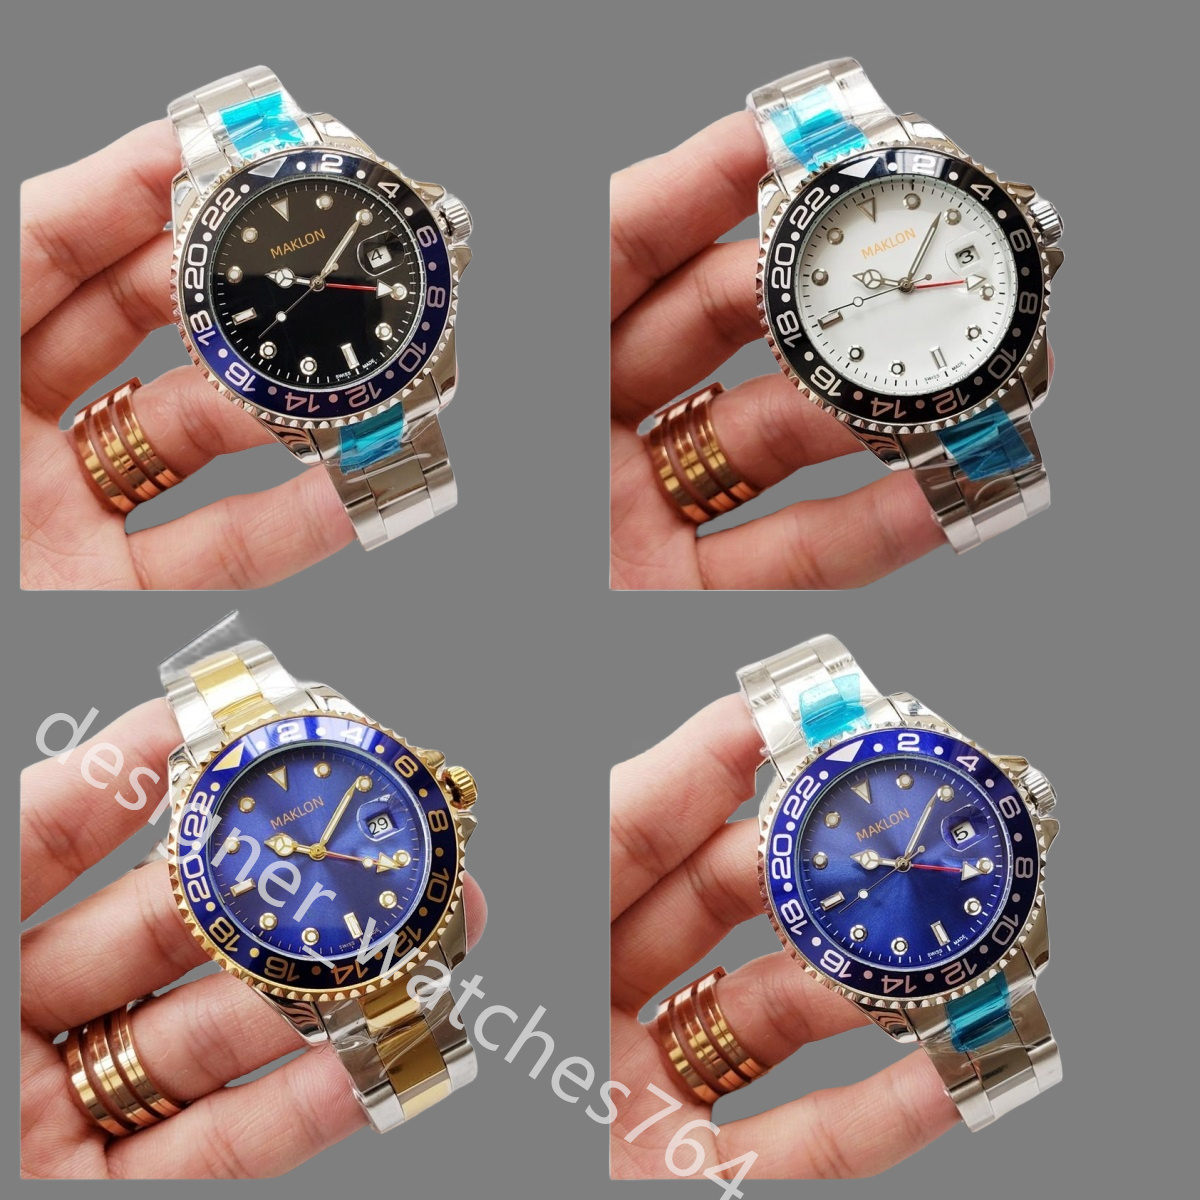 mens mechanical watchs Automatic Mechanical Movement Made Of Premium Stainless Steel Sapphire glass made waterproof heure watch high quality designer watches